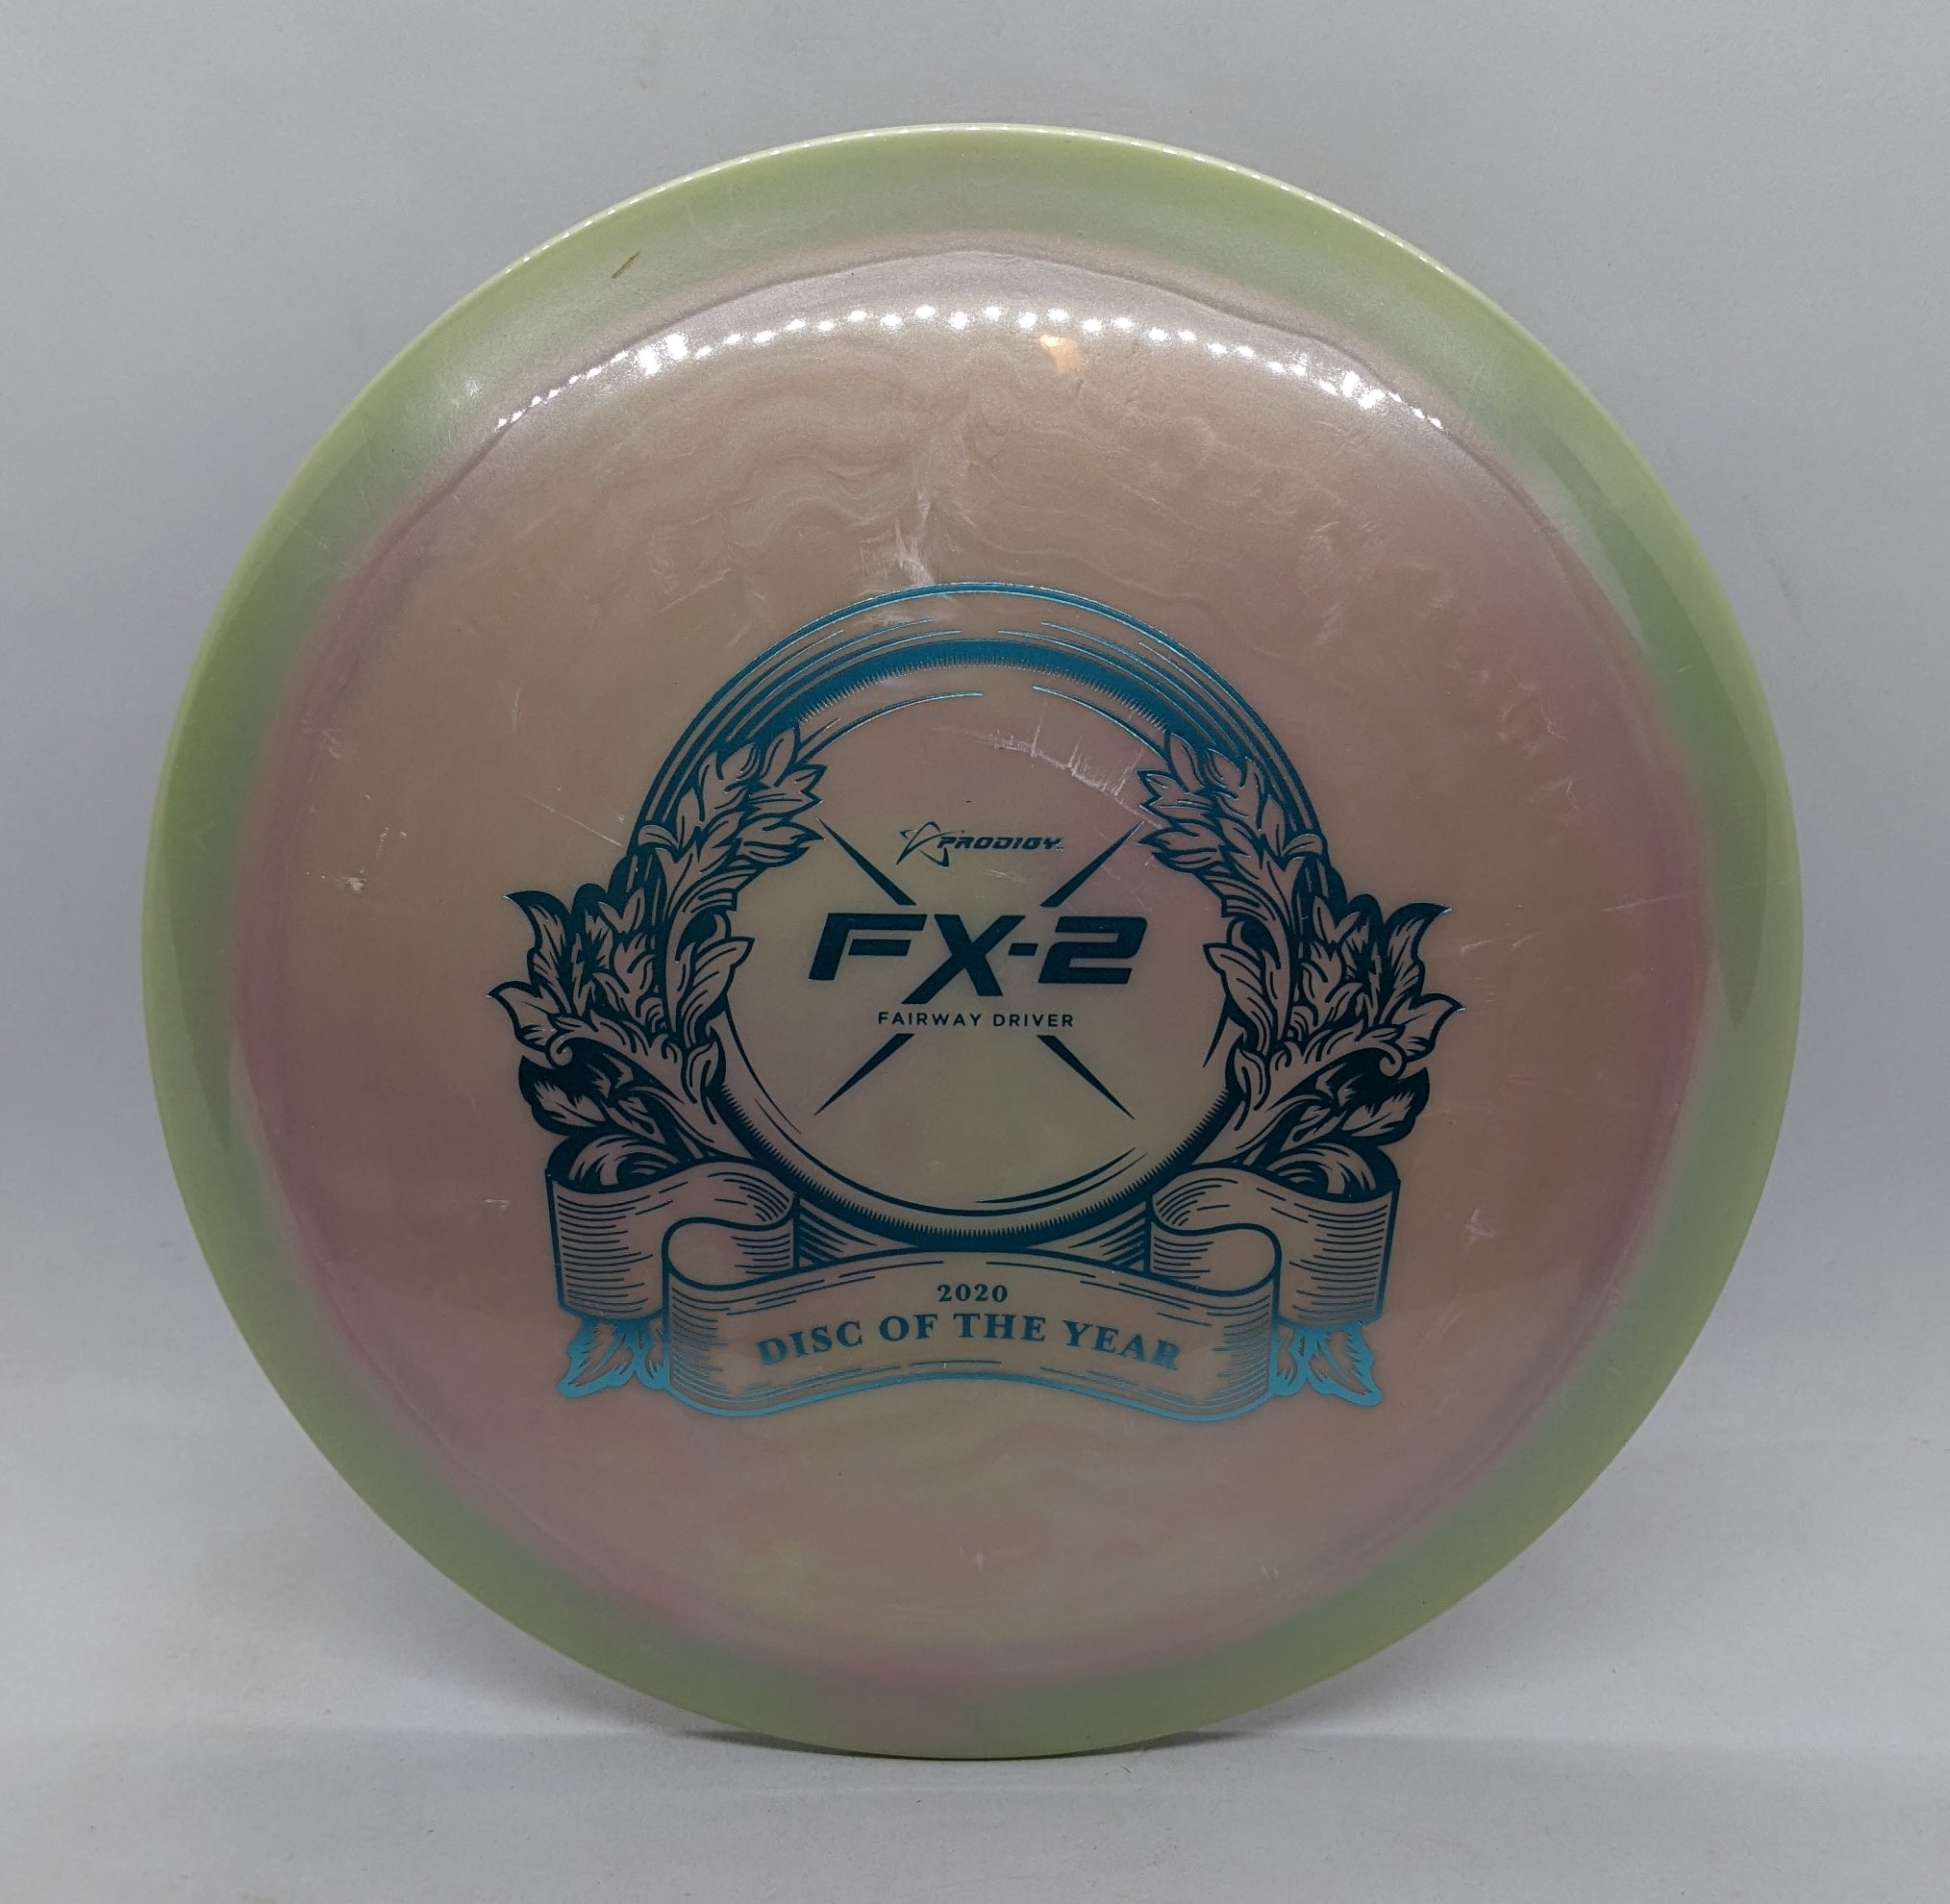 FX-2 400G 2020 Disc of the Year Stamp-7